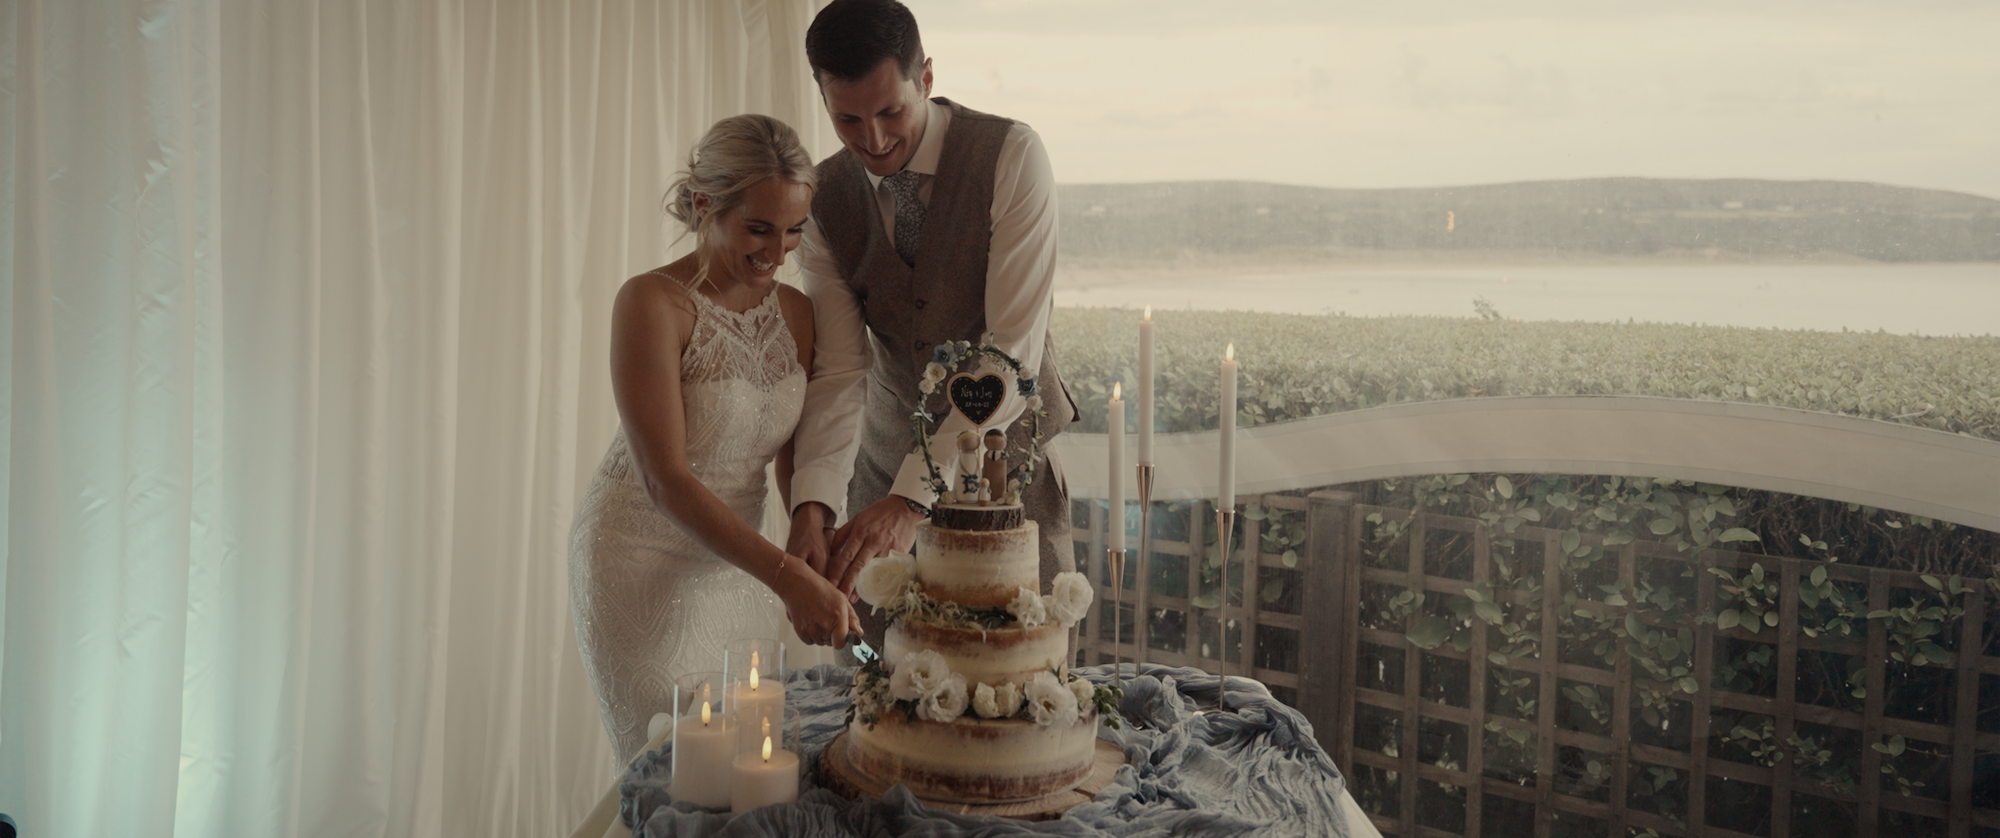 Oxwich Bay Hotel Wedding Videography by Ben Holbrook Films (Swansea South Wales).jpeg36.png